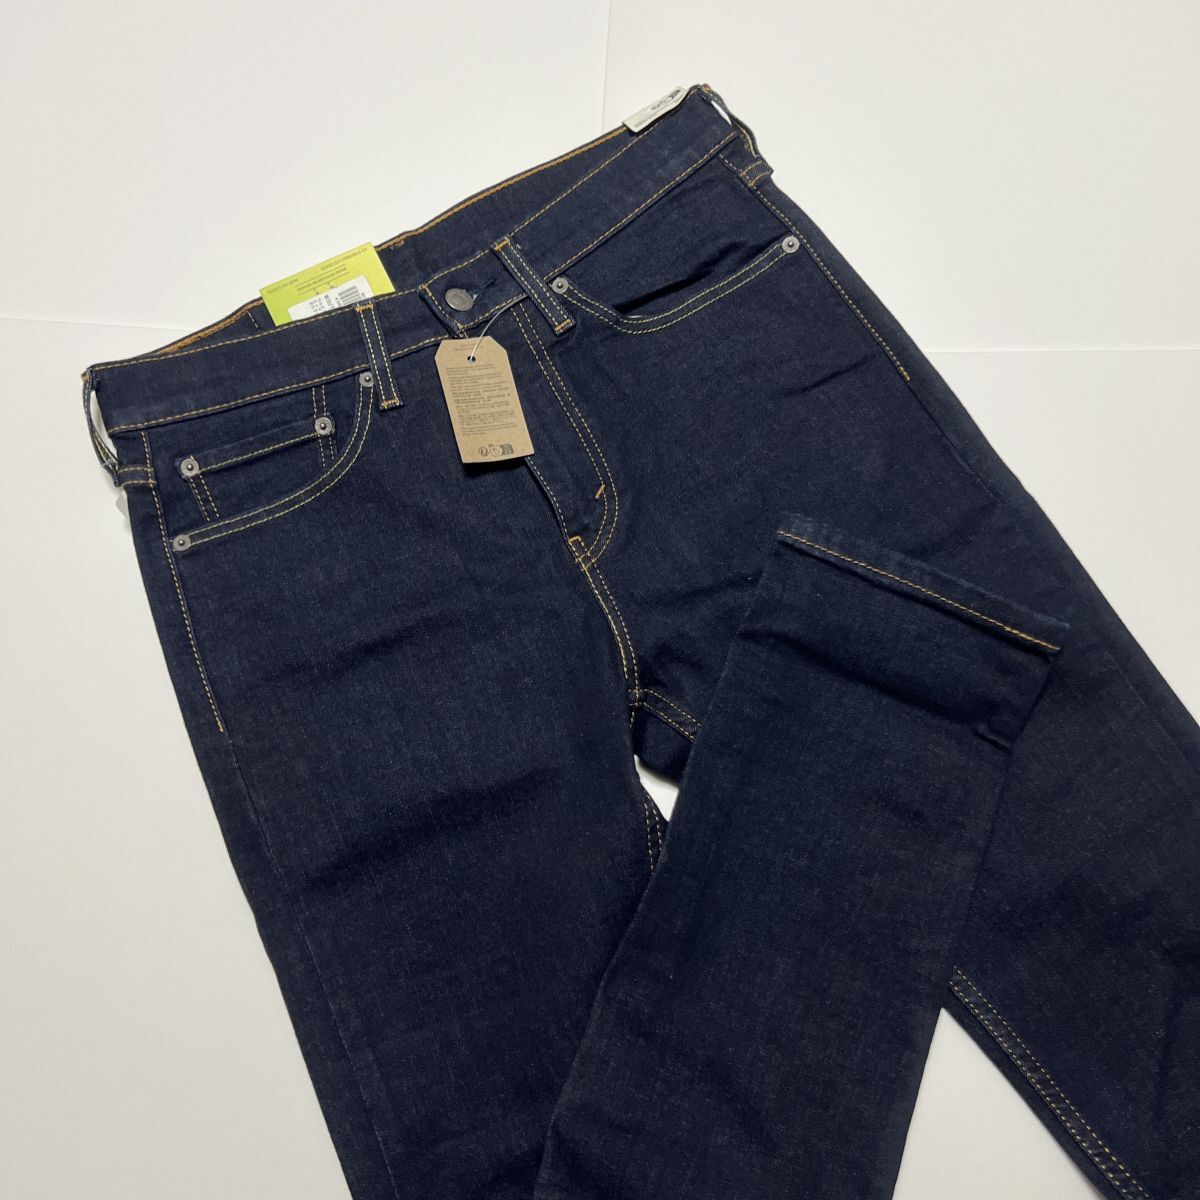 * Levi's Levis 510 new goods men's comfortable stretch casual skinny jeans Denim 34 -inch [05510-0692-34] four .*QWER*